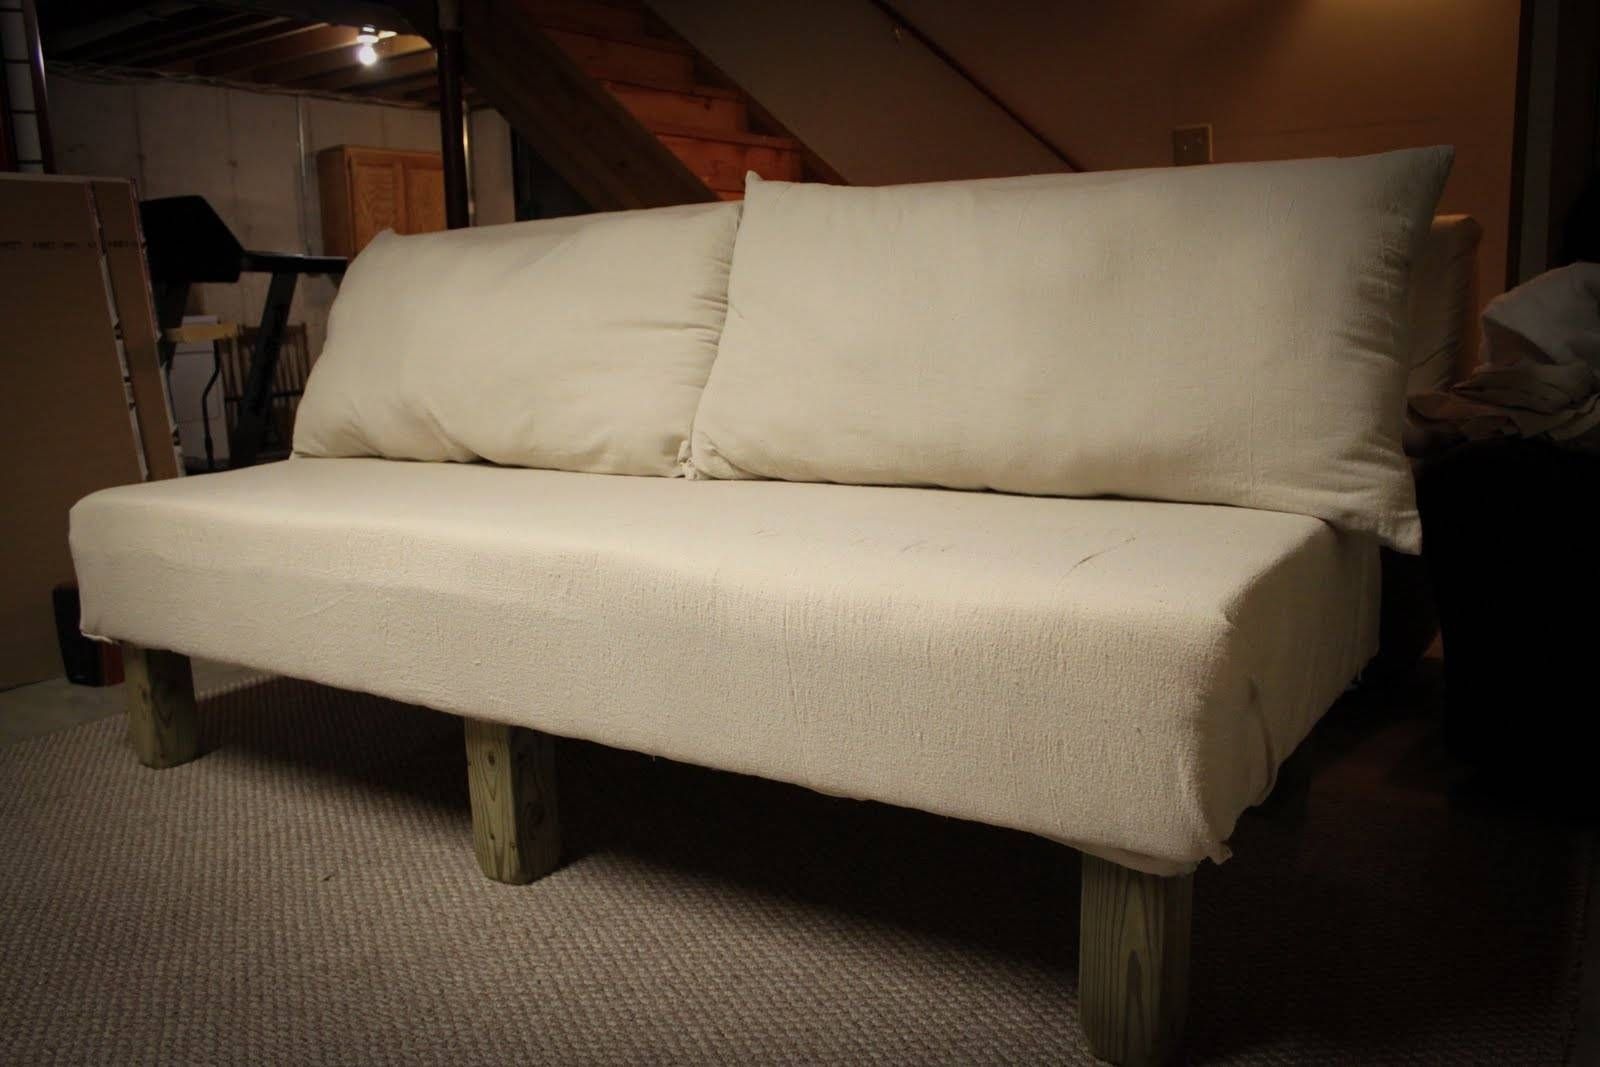 Diy Sofa Slipcover Ideas #13852 Intended For Diy Sectional Sofa (View 17 of 30)